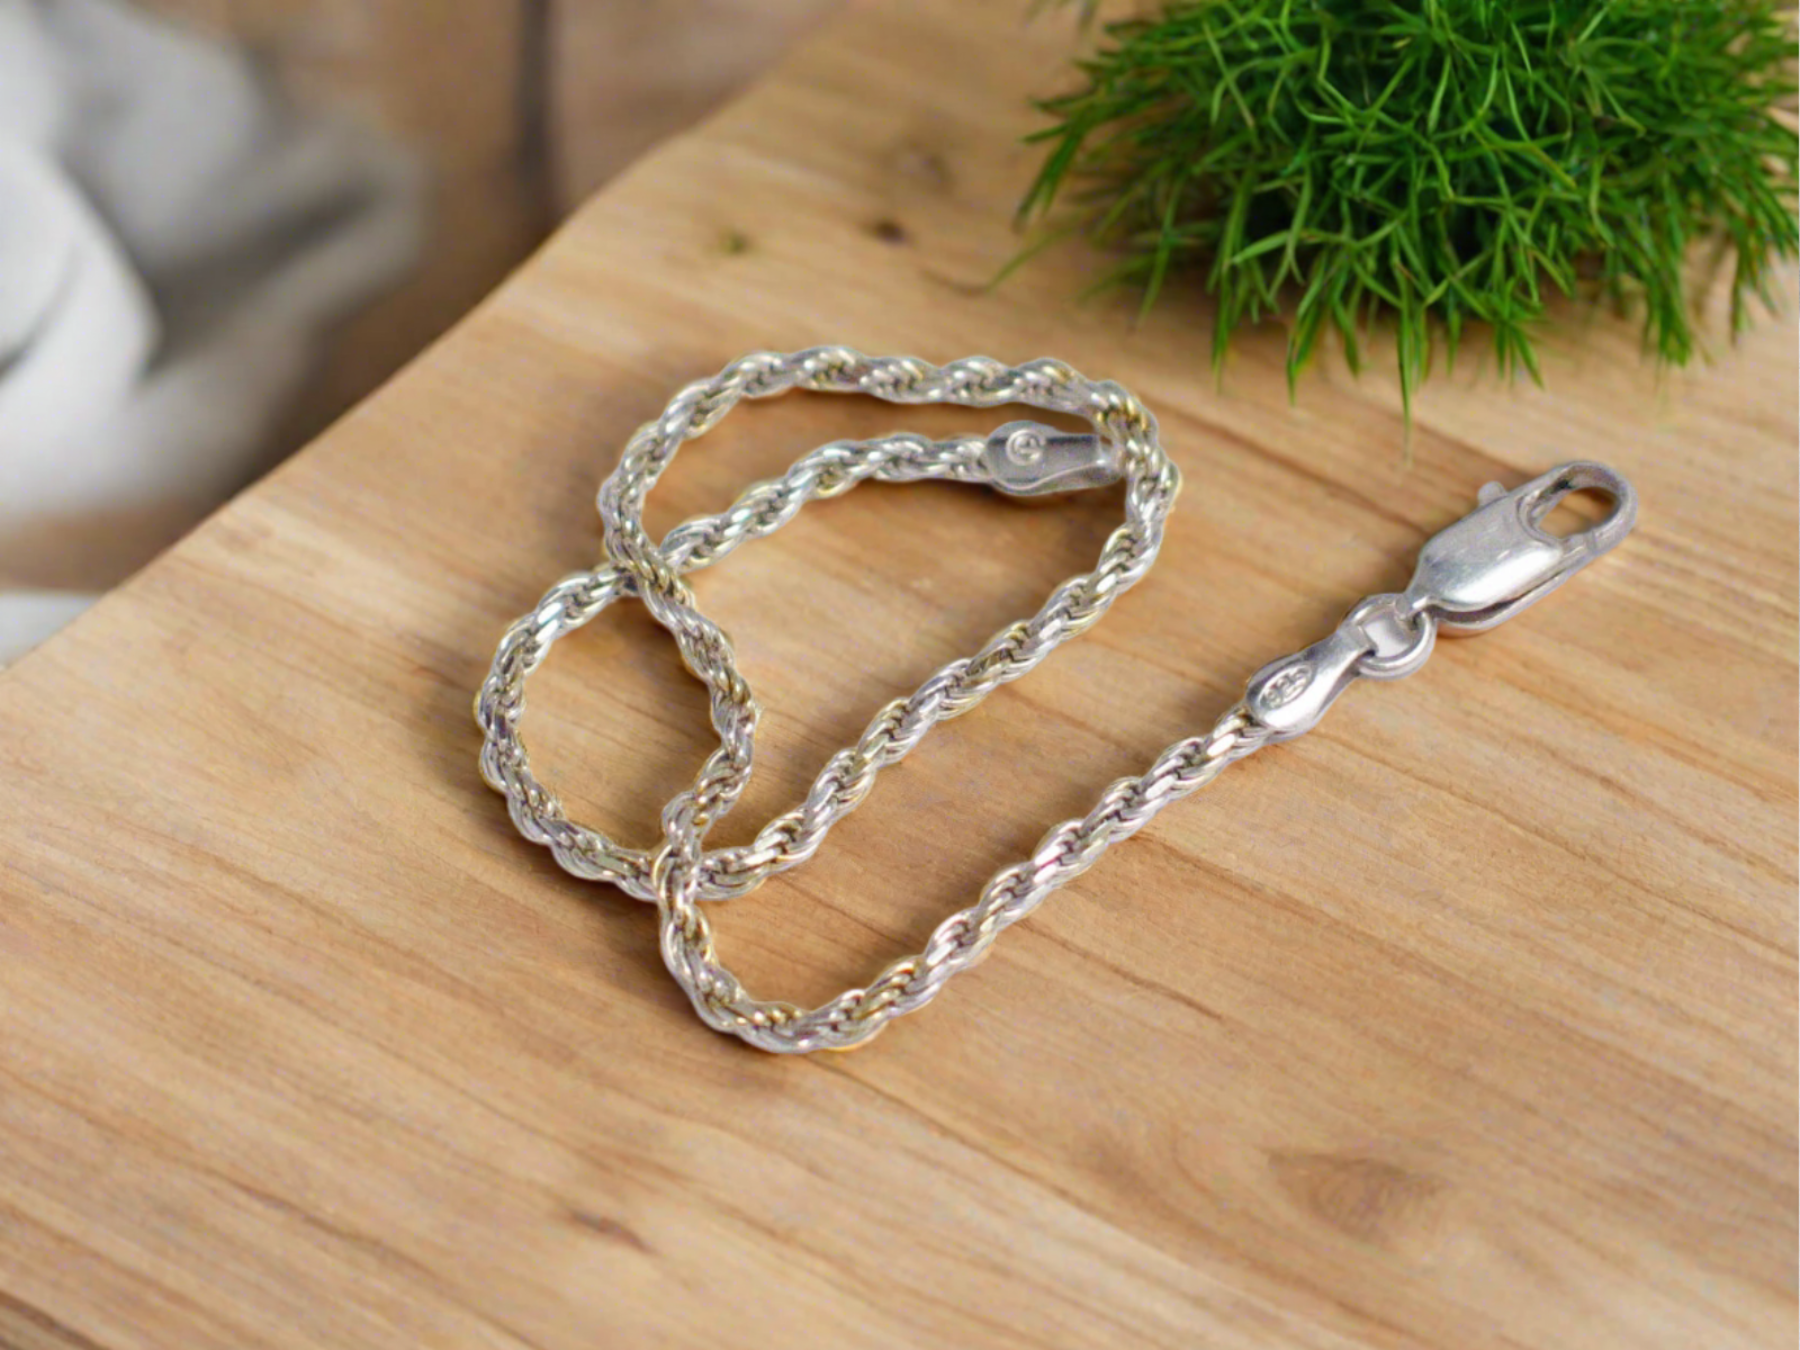 Sterling Silver Rope Chain Bracelet  - Discount Pre-owned Jewelry online at Blingschlingers